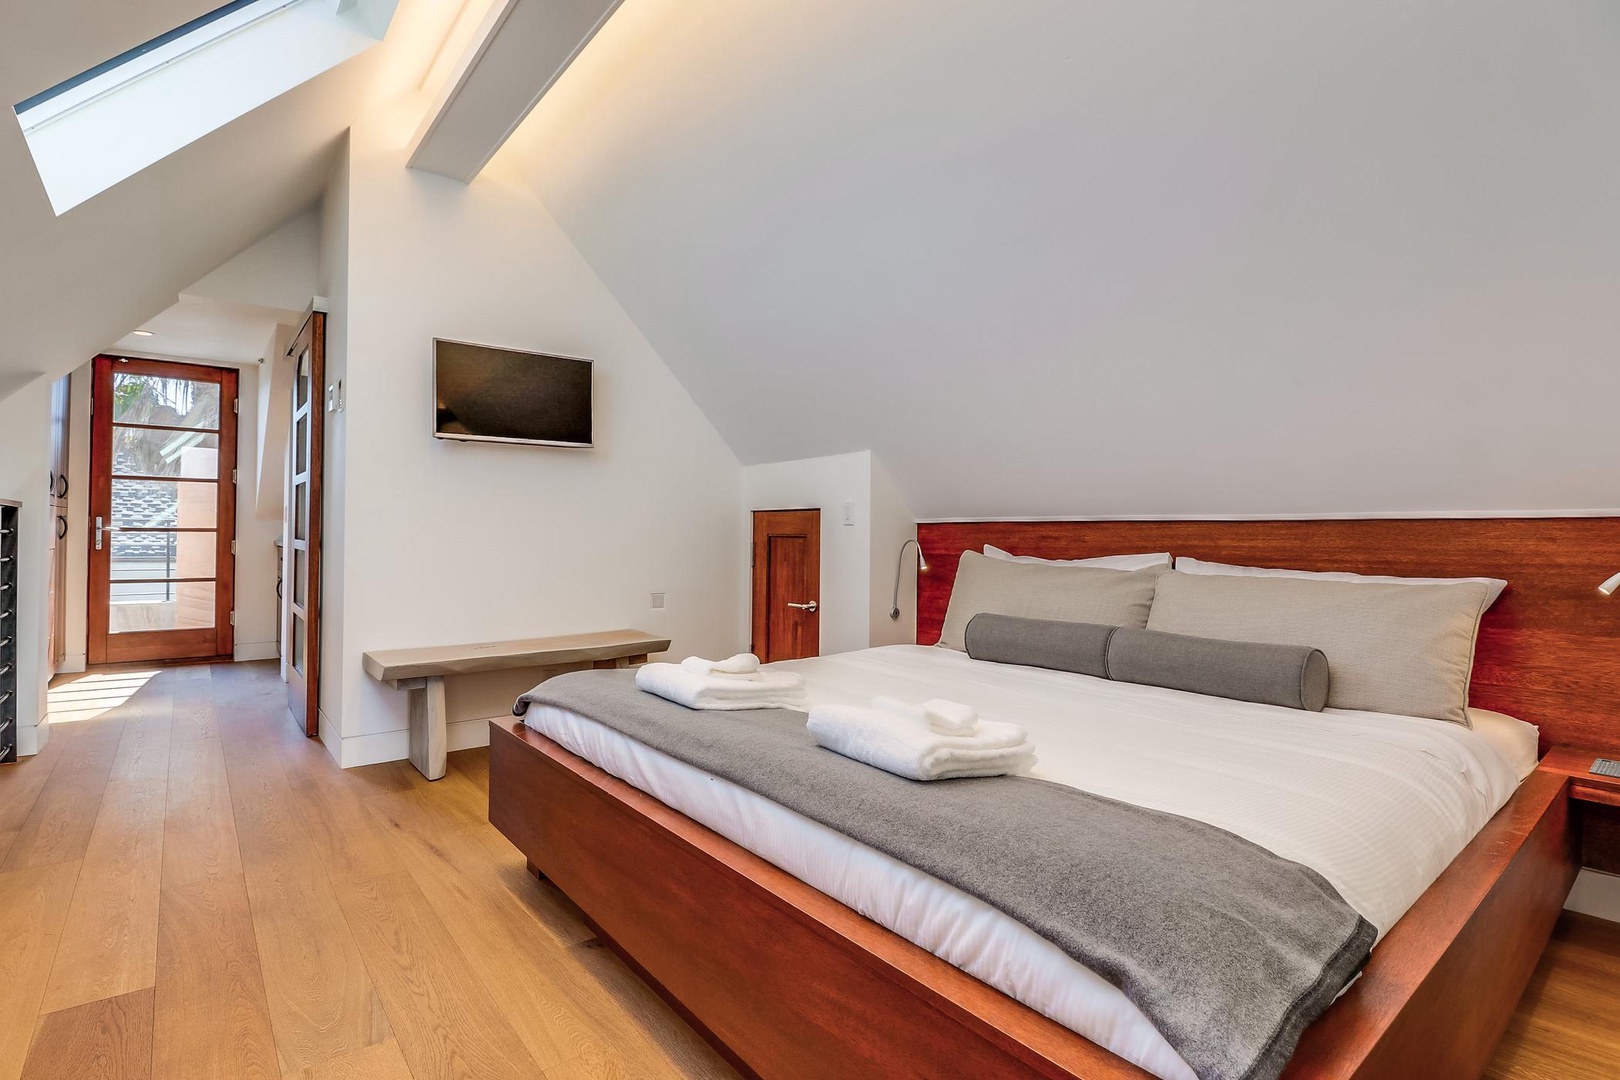 The master loft features a king bed